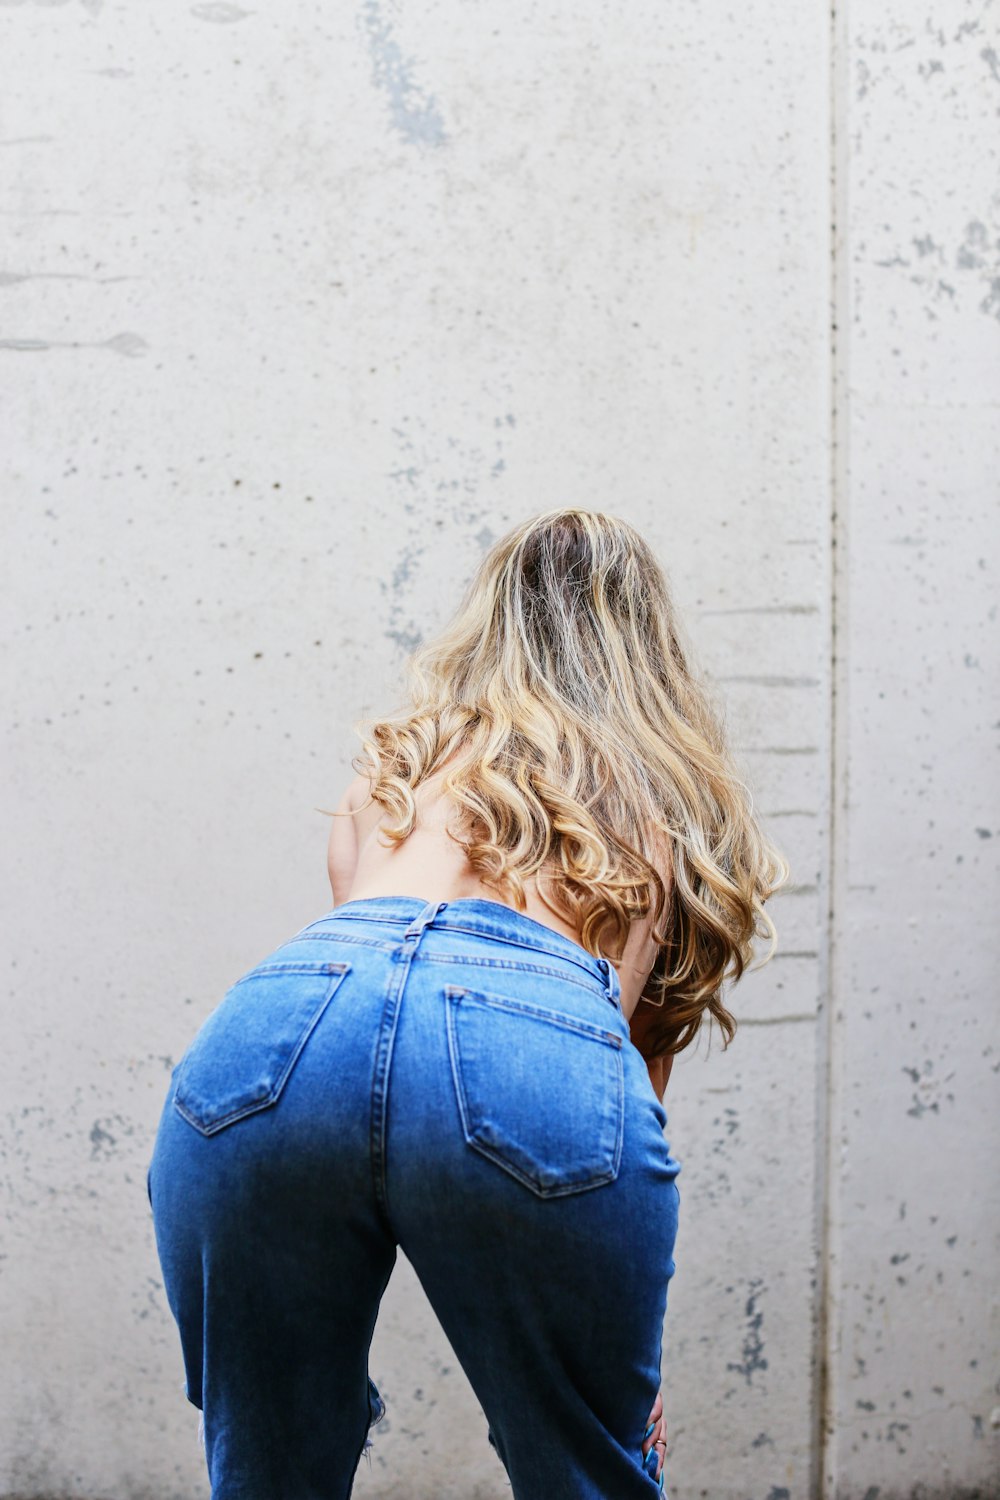 1000+ Tight Jeans Pictures | Download Free Images on Unsplash